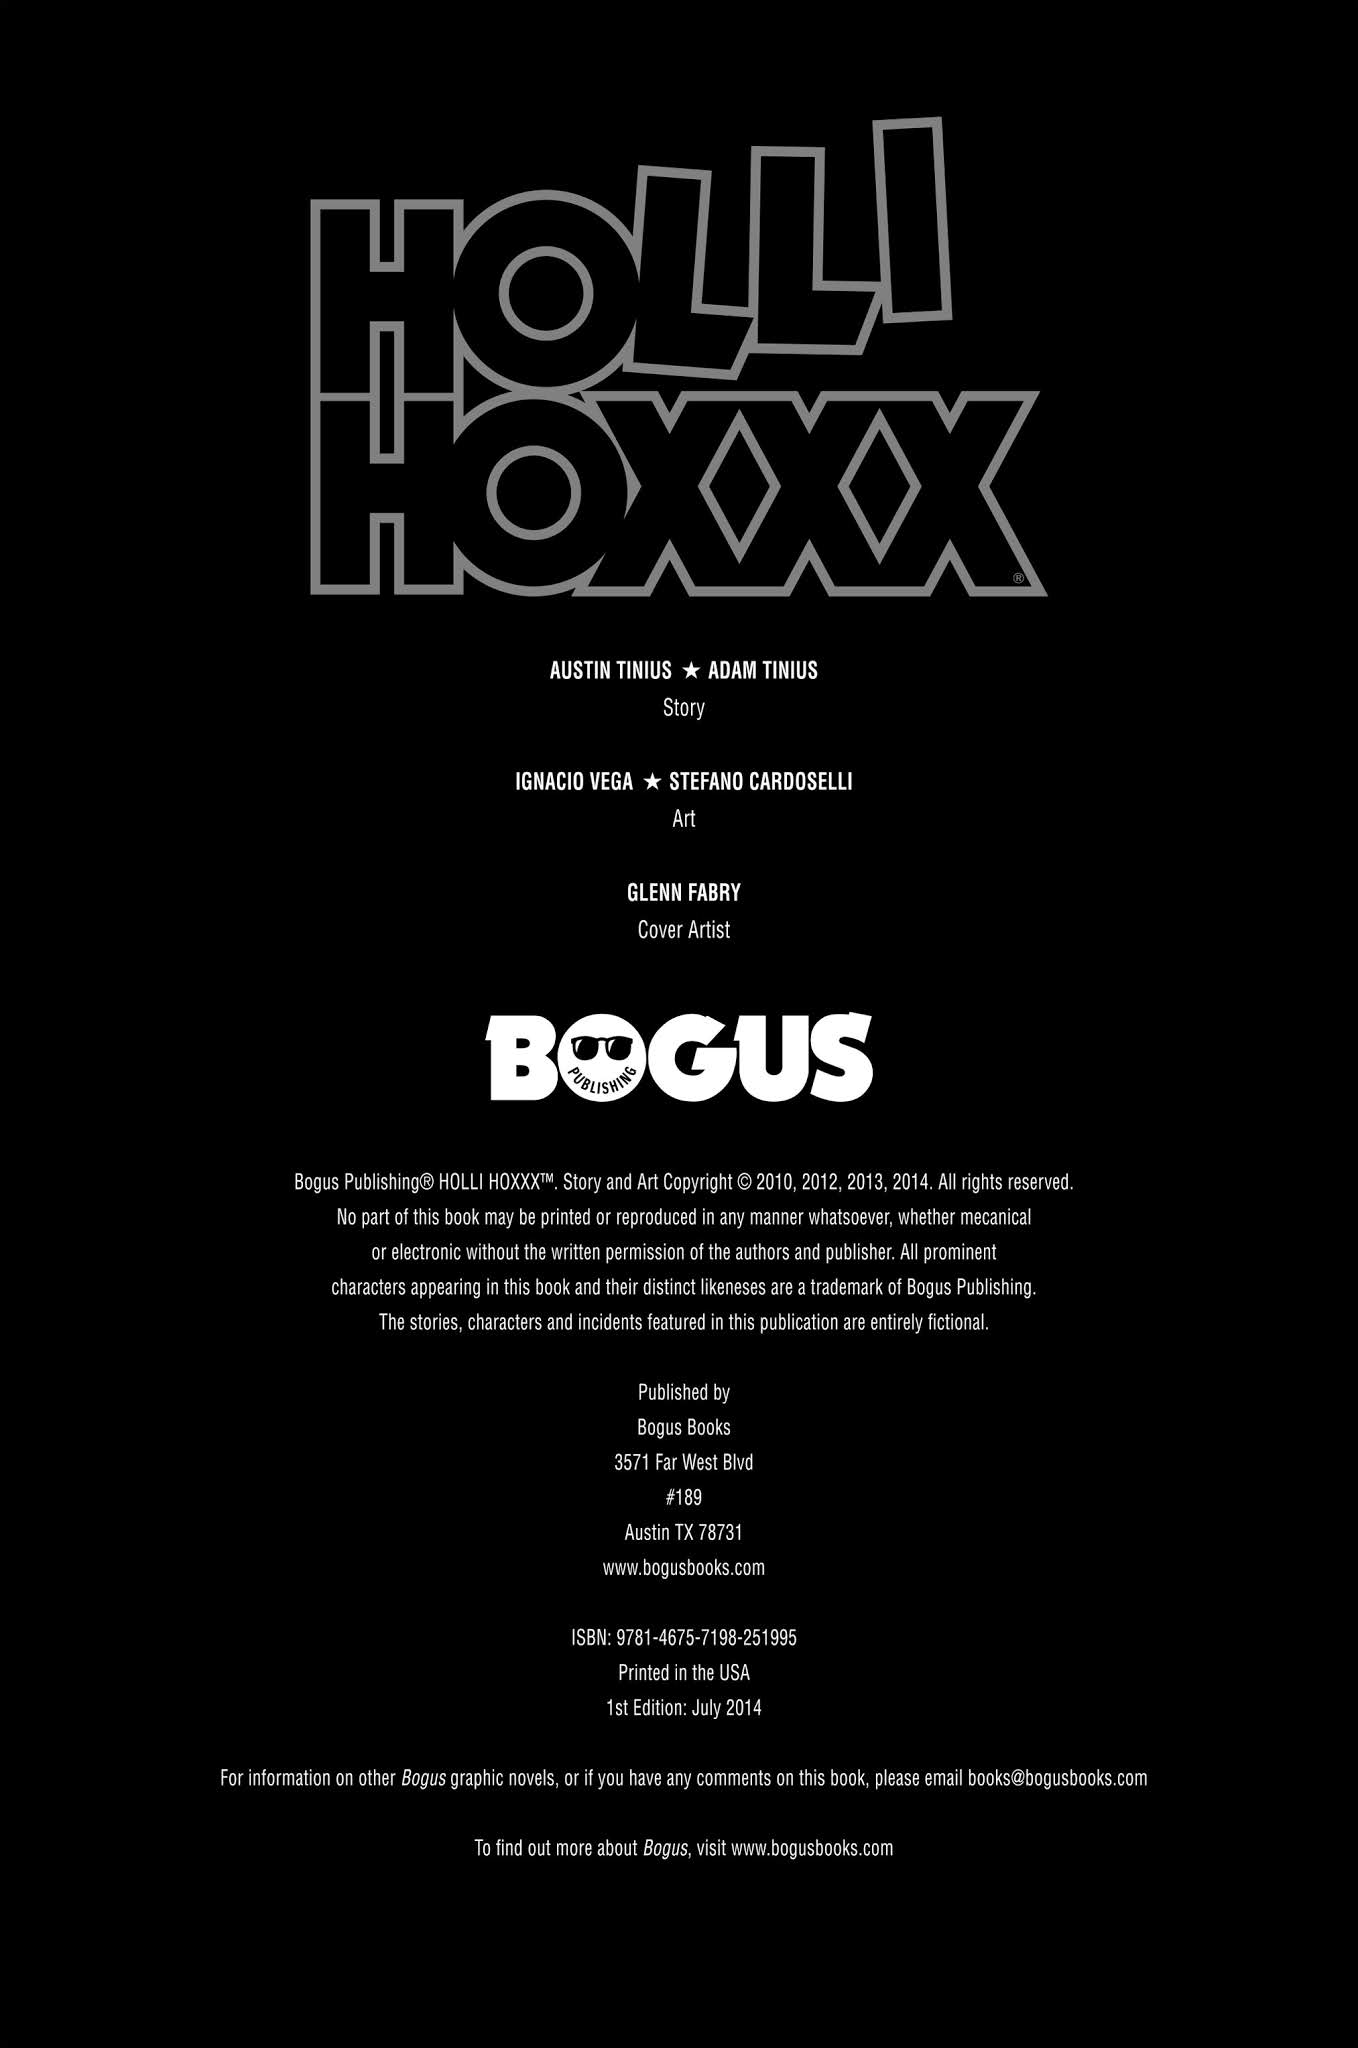 Read online Holli Hoxxx comic -  Issue # Full - 3